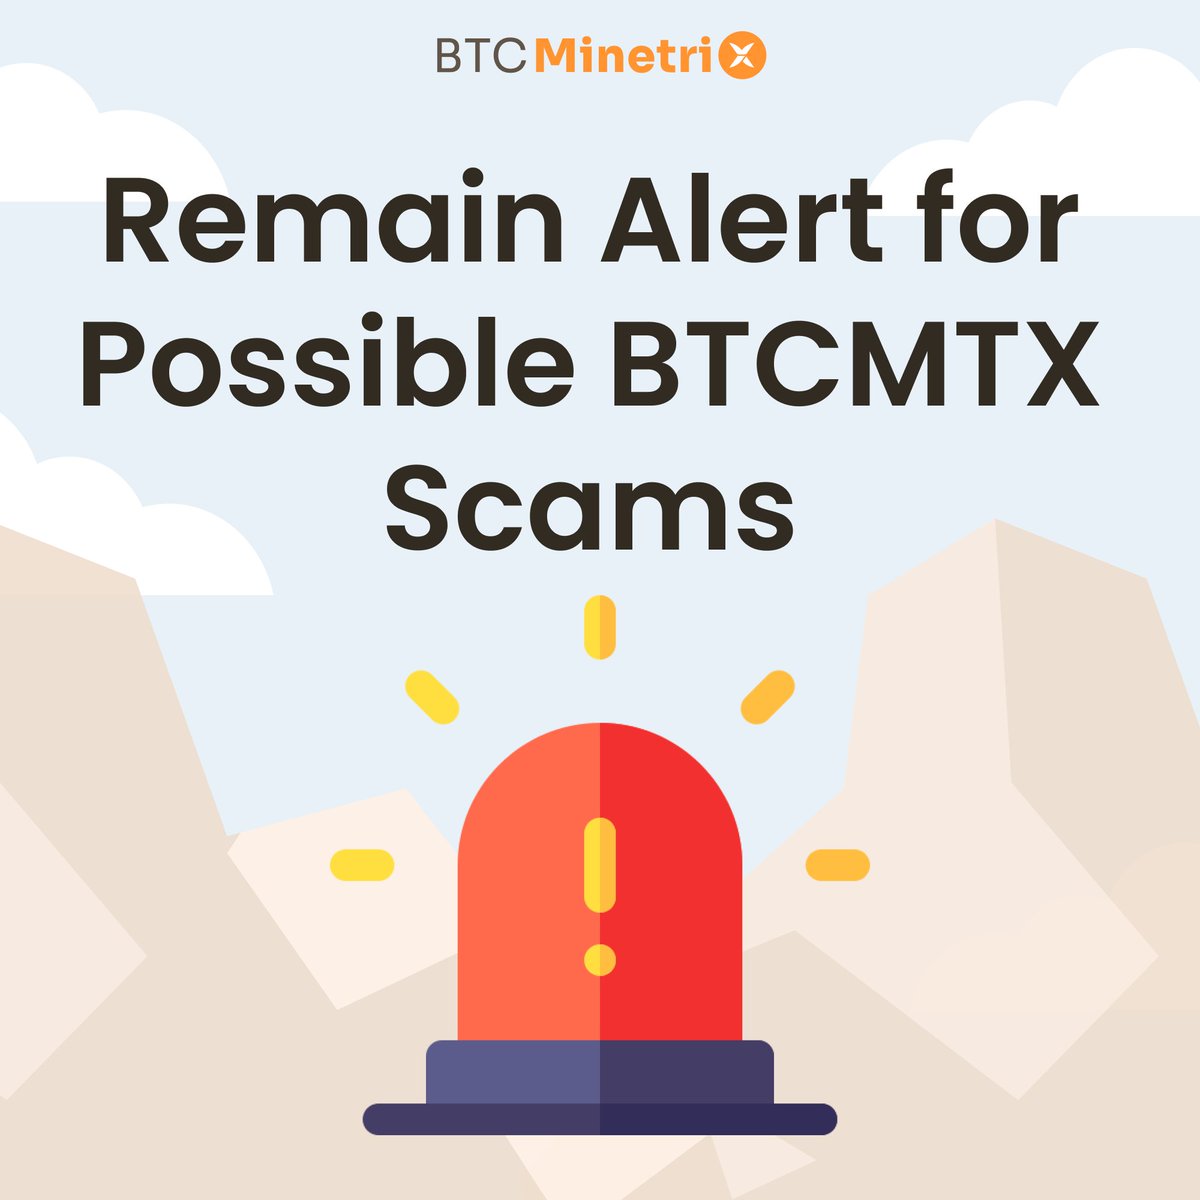 Remain alert for possible #BitcoinMinetrix Scams! 🛑 Here are some crucial safety tips: 🔐 Always double-check information from reliable sources. Avoid disclosing personal or sensitive information. #Bitcoin #CloudMining